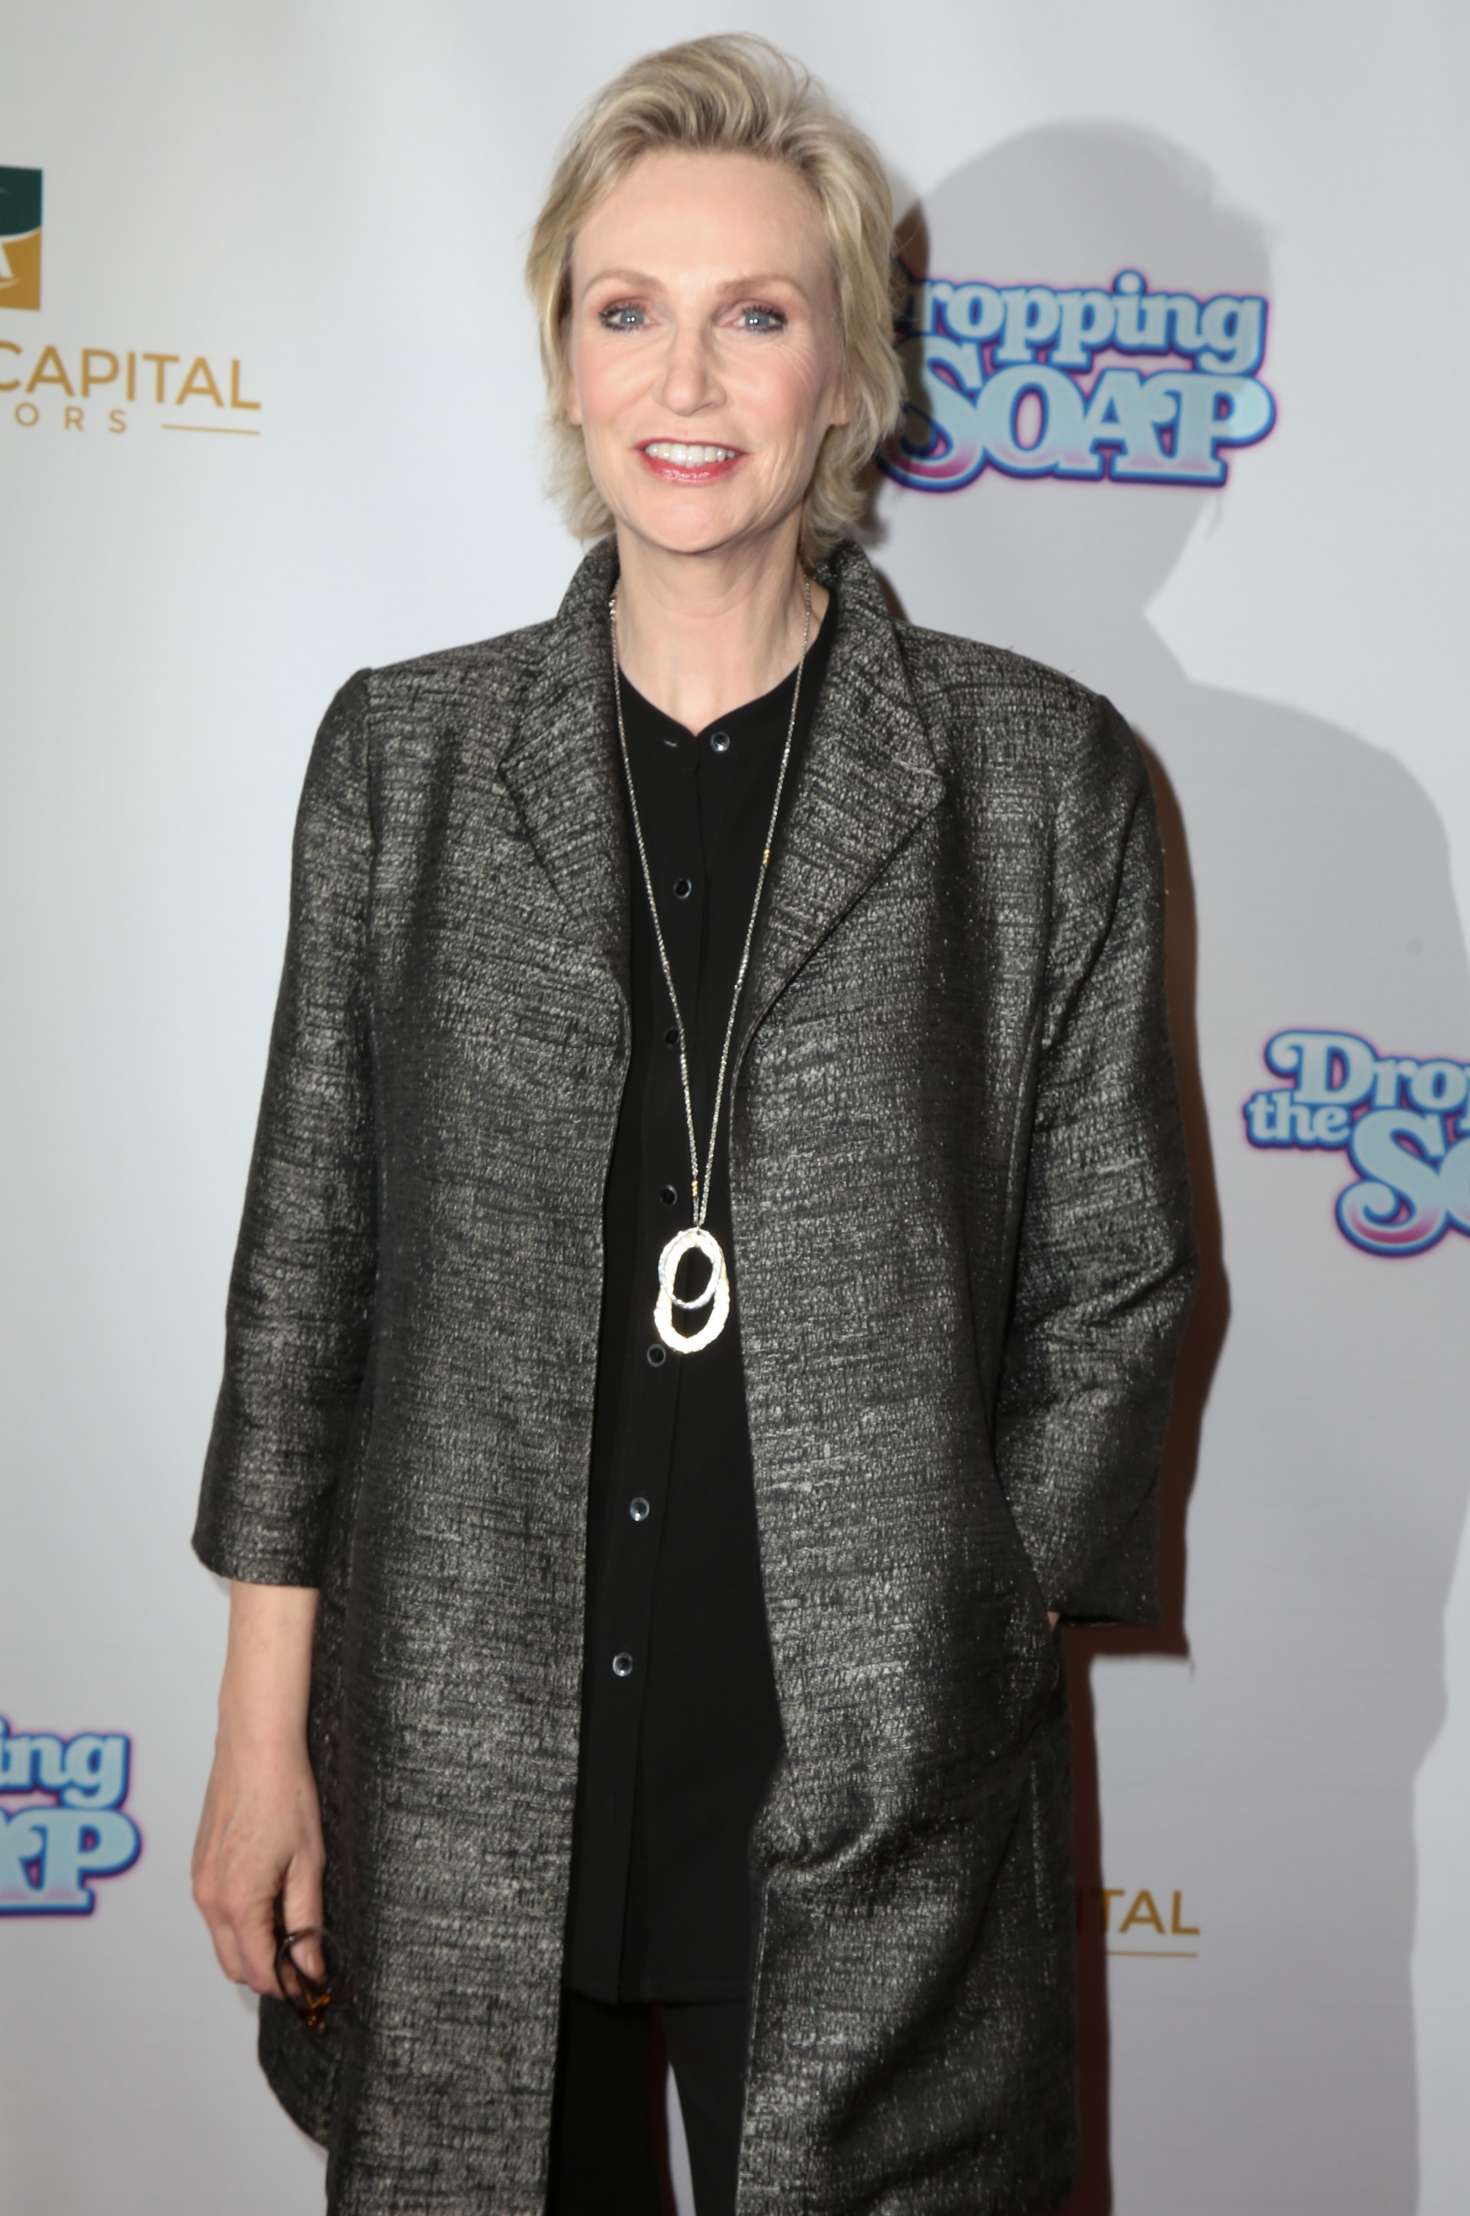 Jane Lynch - 'Dropping The Soap' Premiere in Beverly Hills